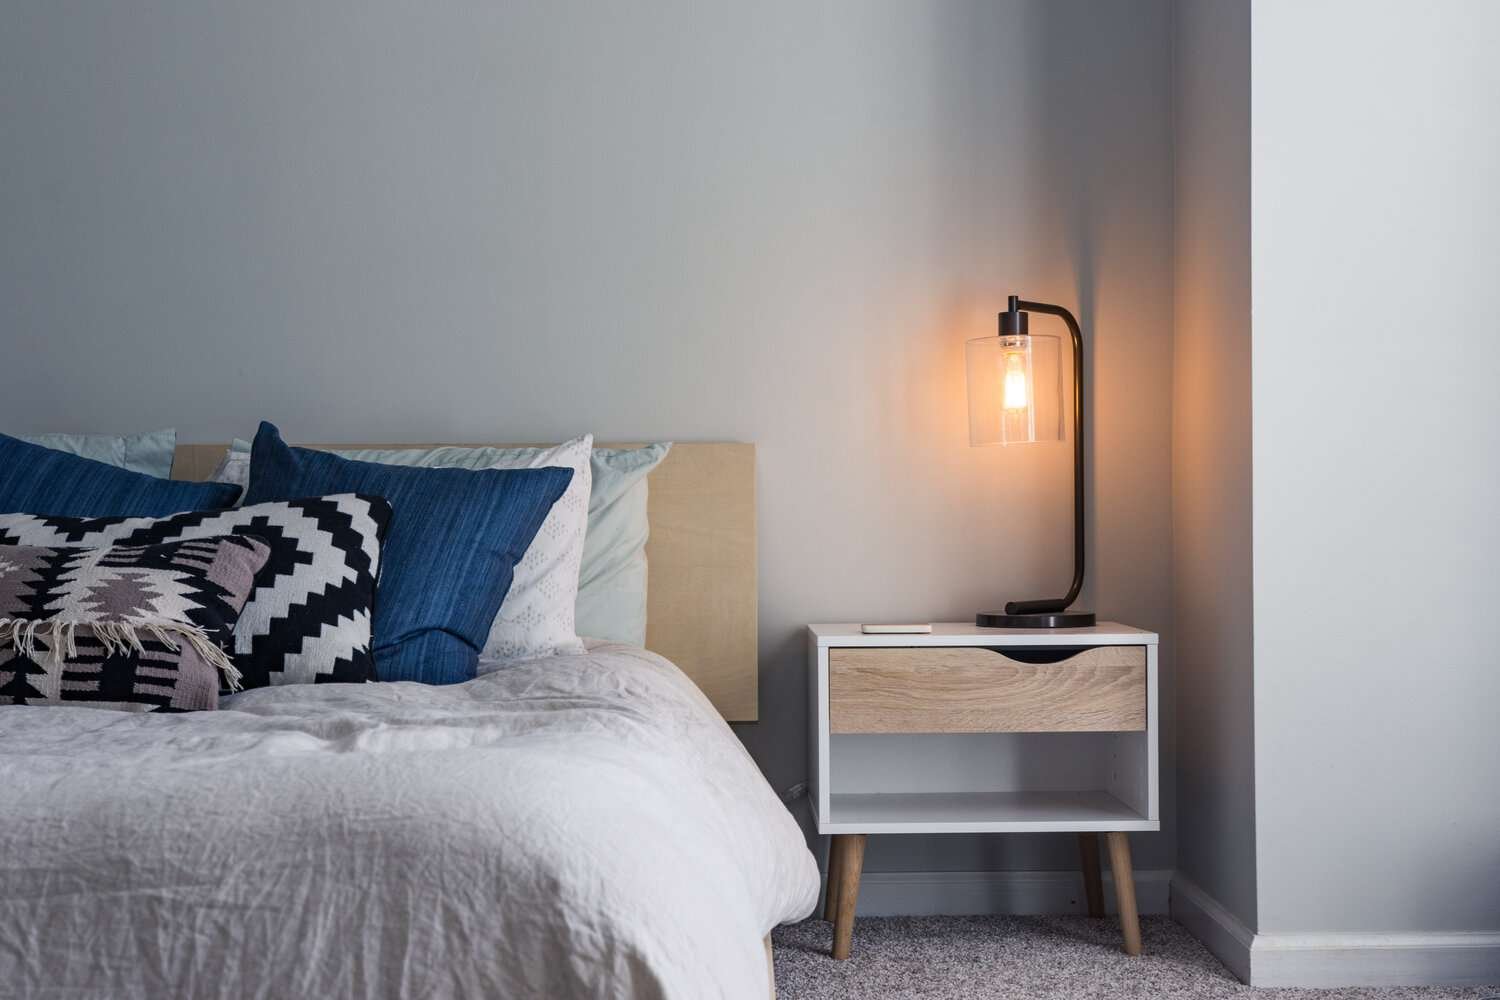 embrace minimalism to make your small room look bigger